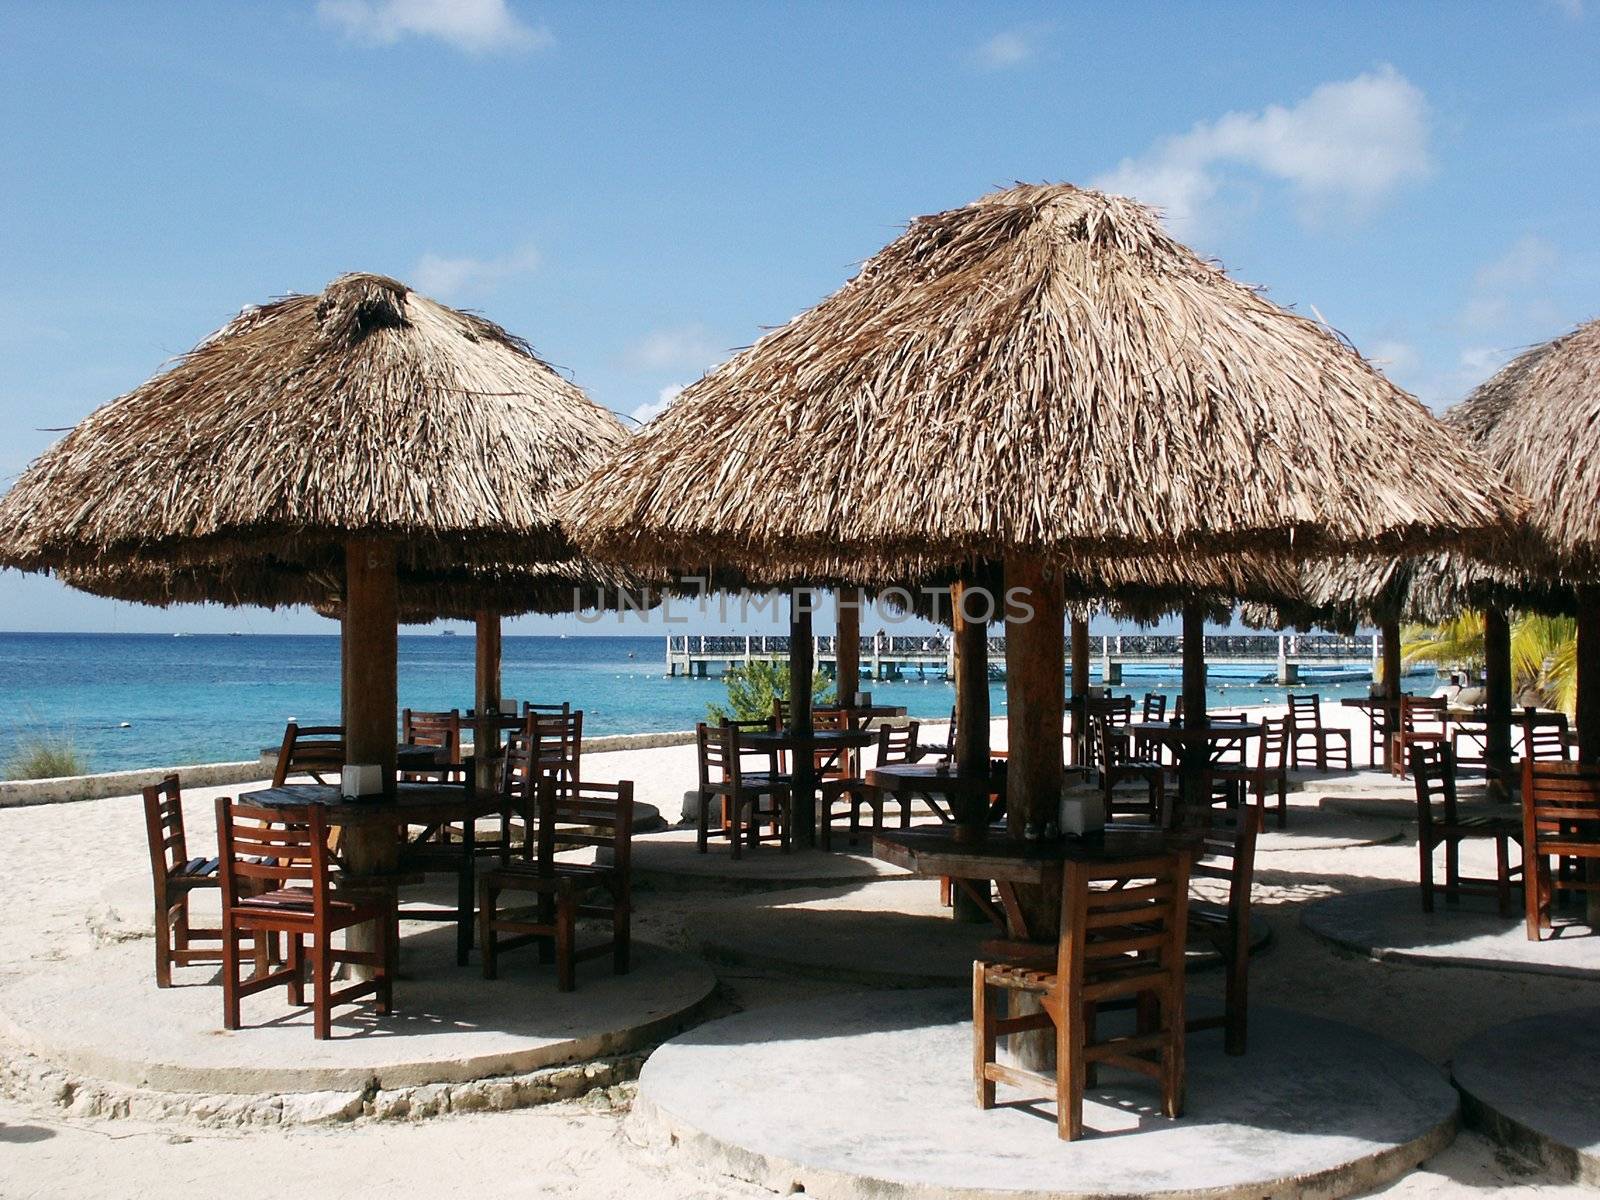 Tables on the beach with thatched umbrellas.